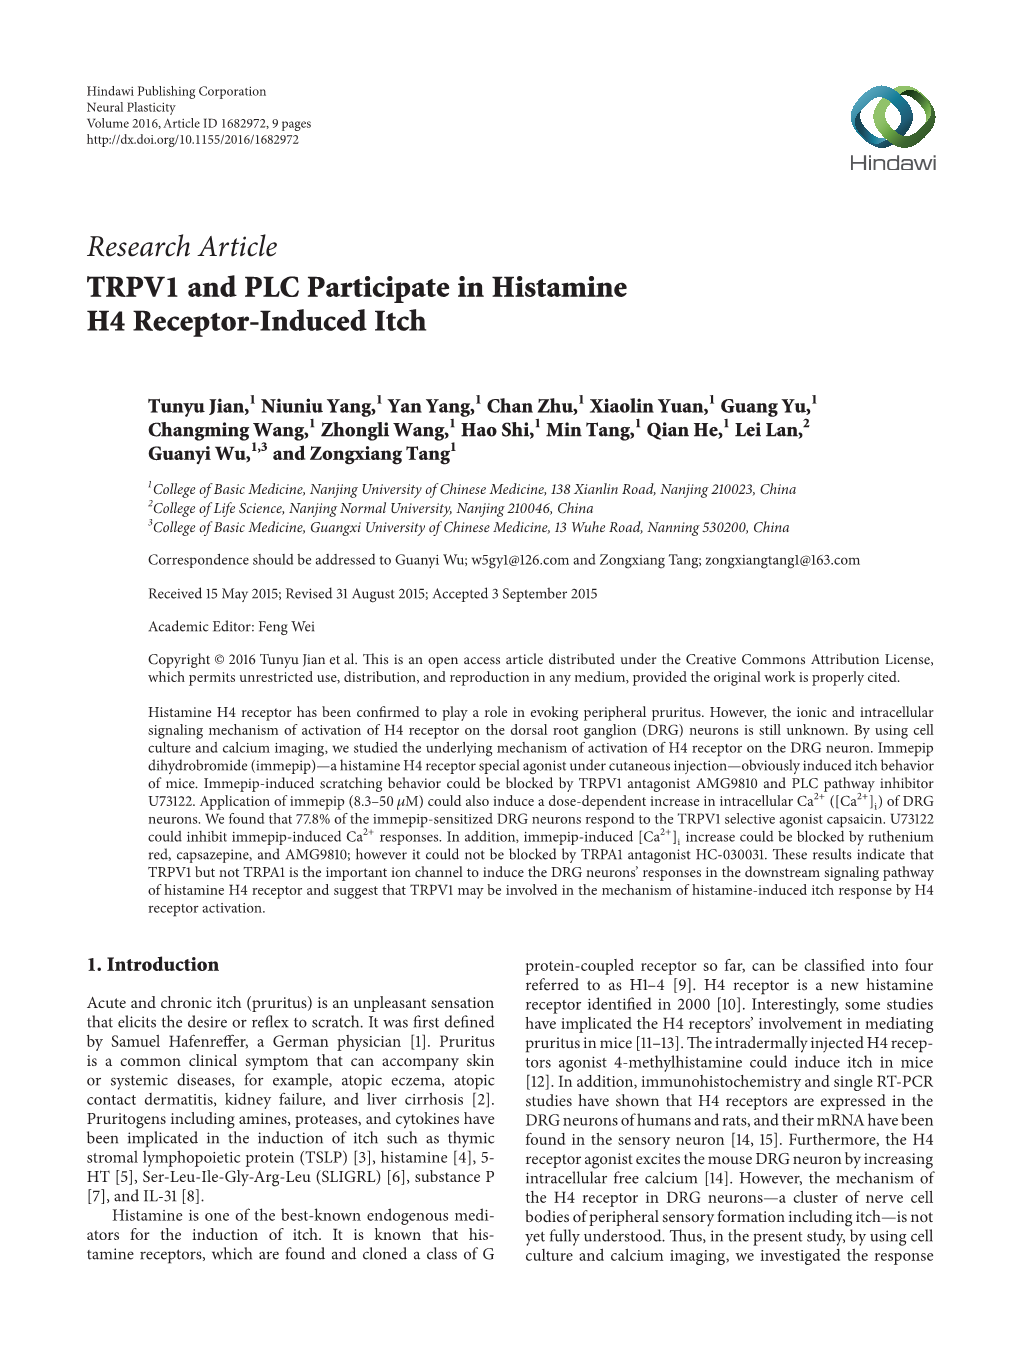 Research Article TRPV1 and PLC Participate in Histamine H4 Receptor-Induced Itch